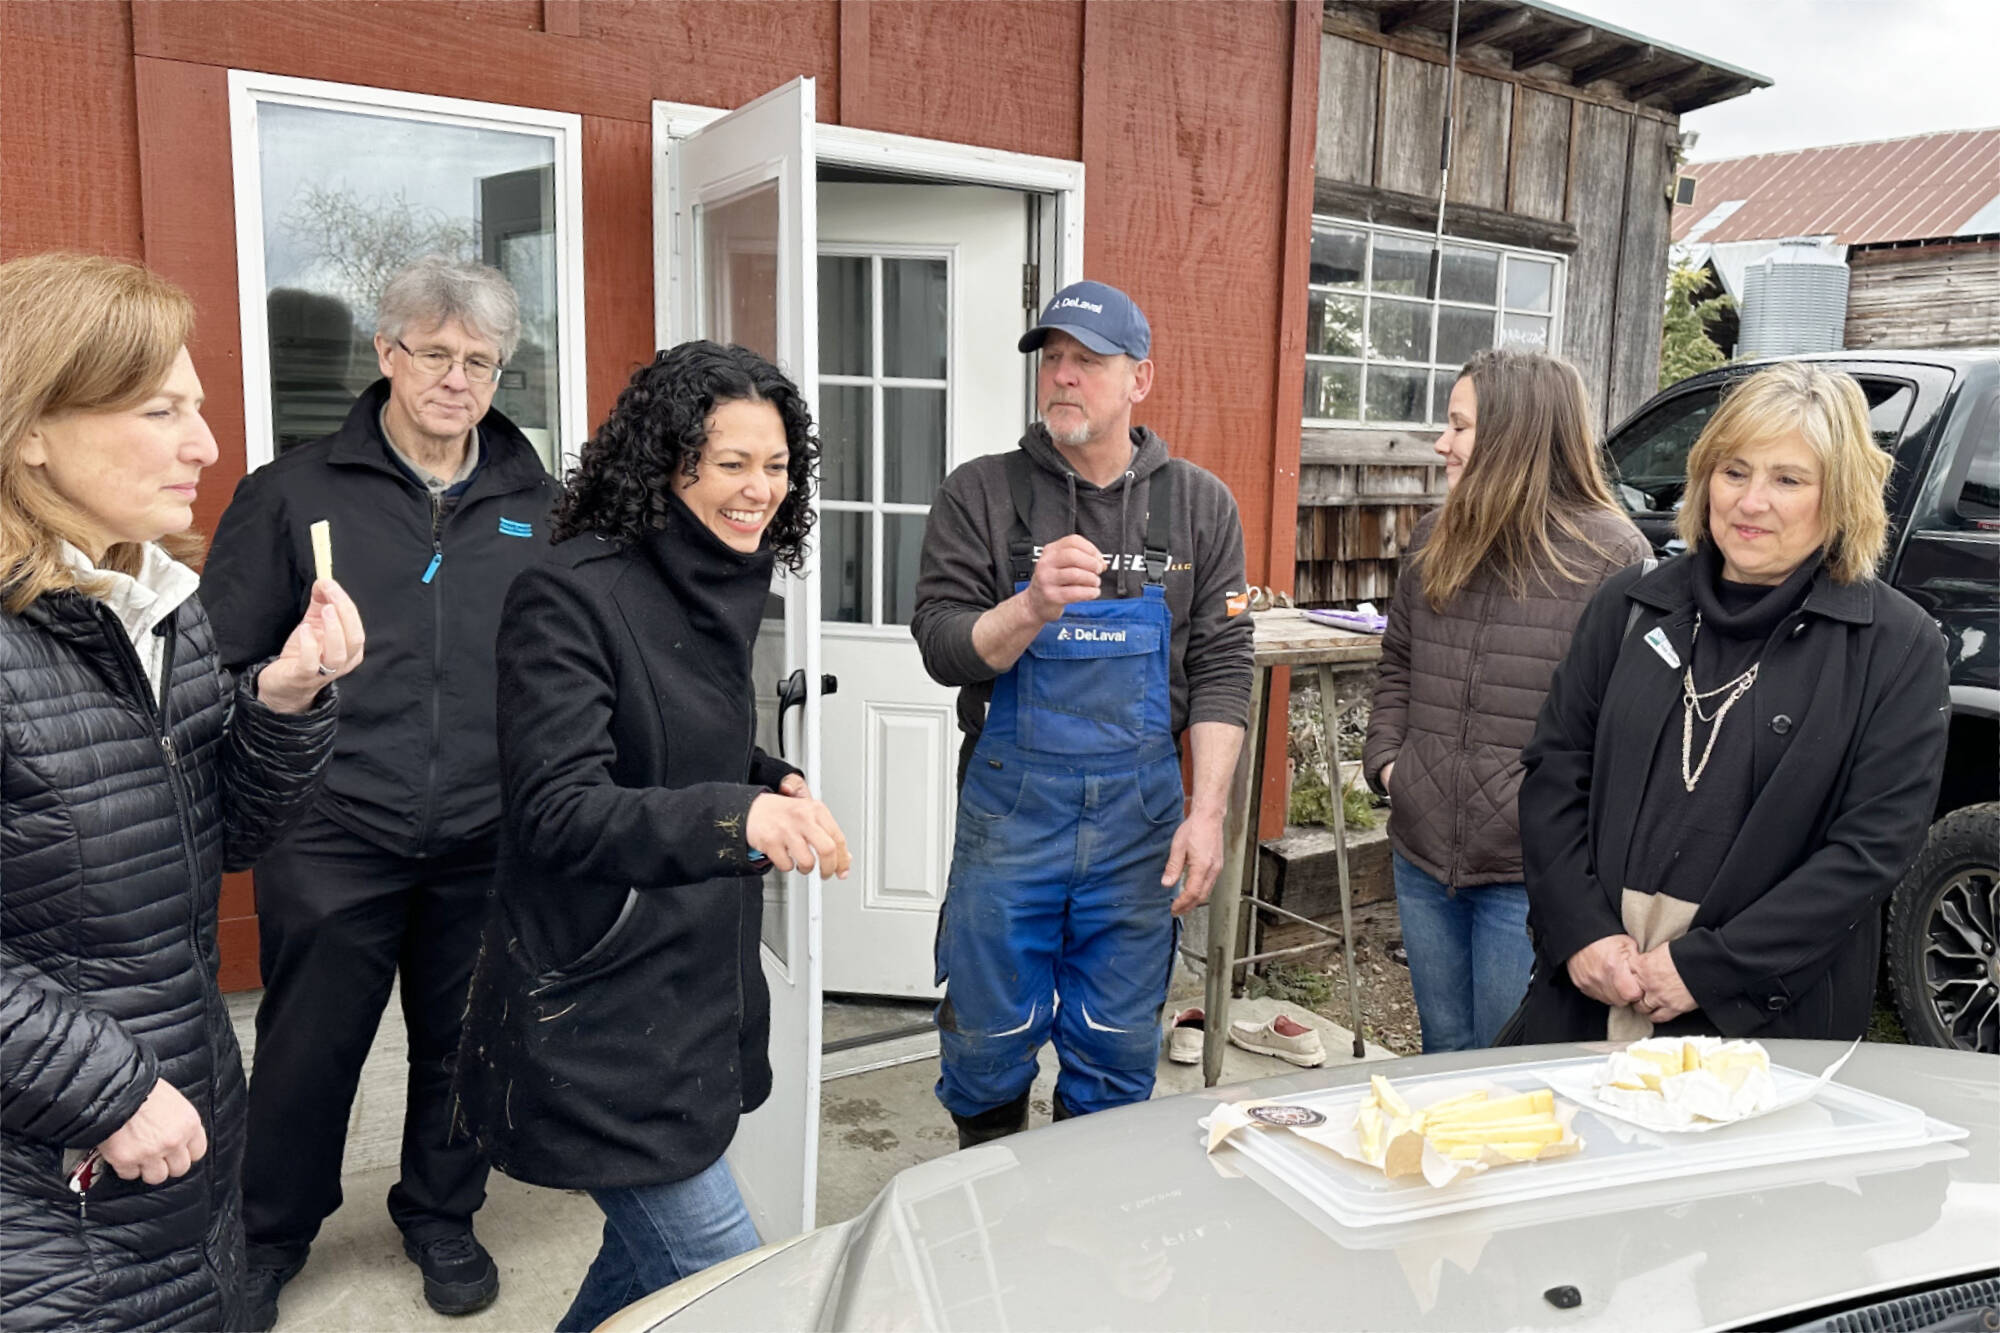 Photo courtesy Schrier’s Office
Rep. Kim Schrier (WA-08, far left) and U.S. Department of Agriculture (USDA) Undersecretary Xochitl Torres Small (center), try Fantello Creamery’s Filomena cheese during an April 4 visit.